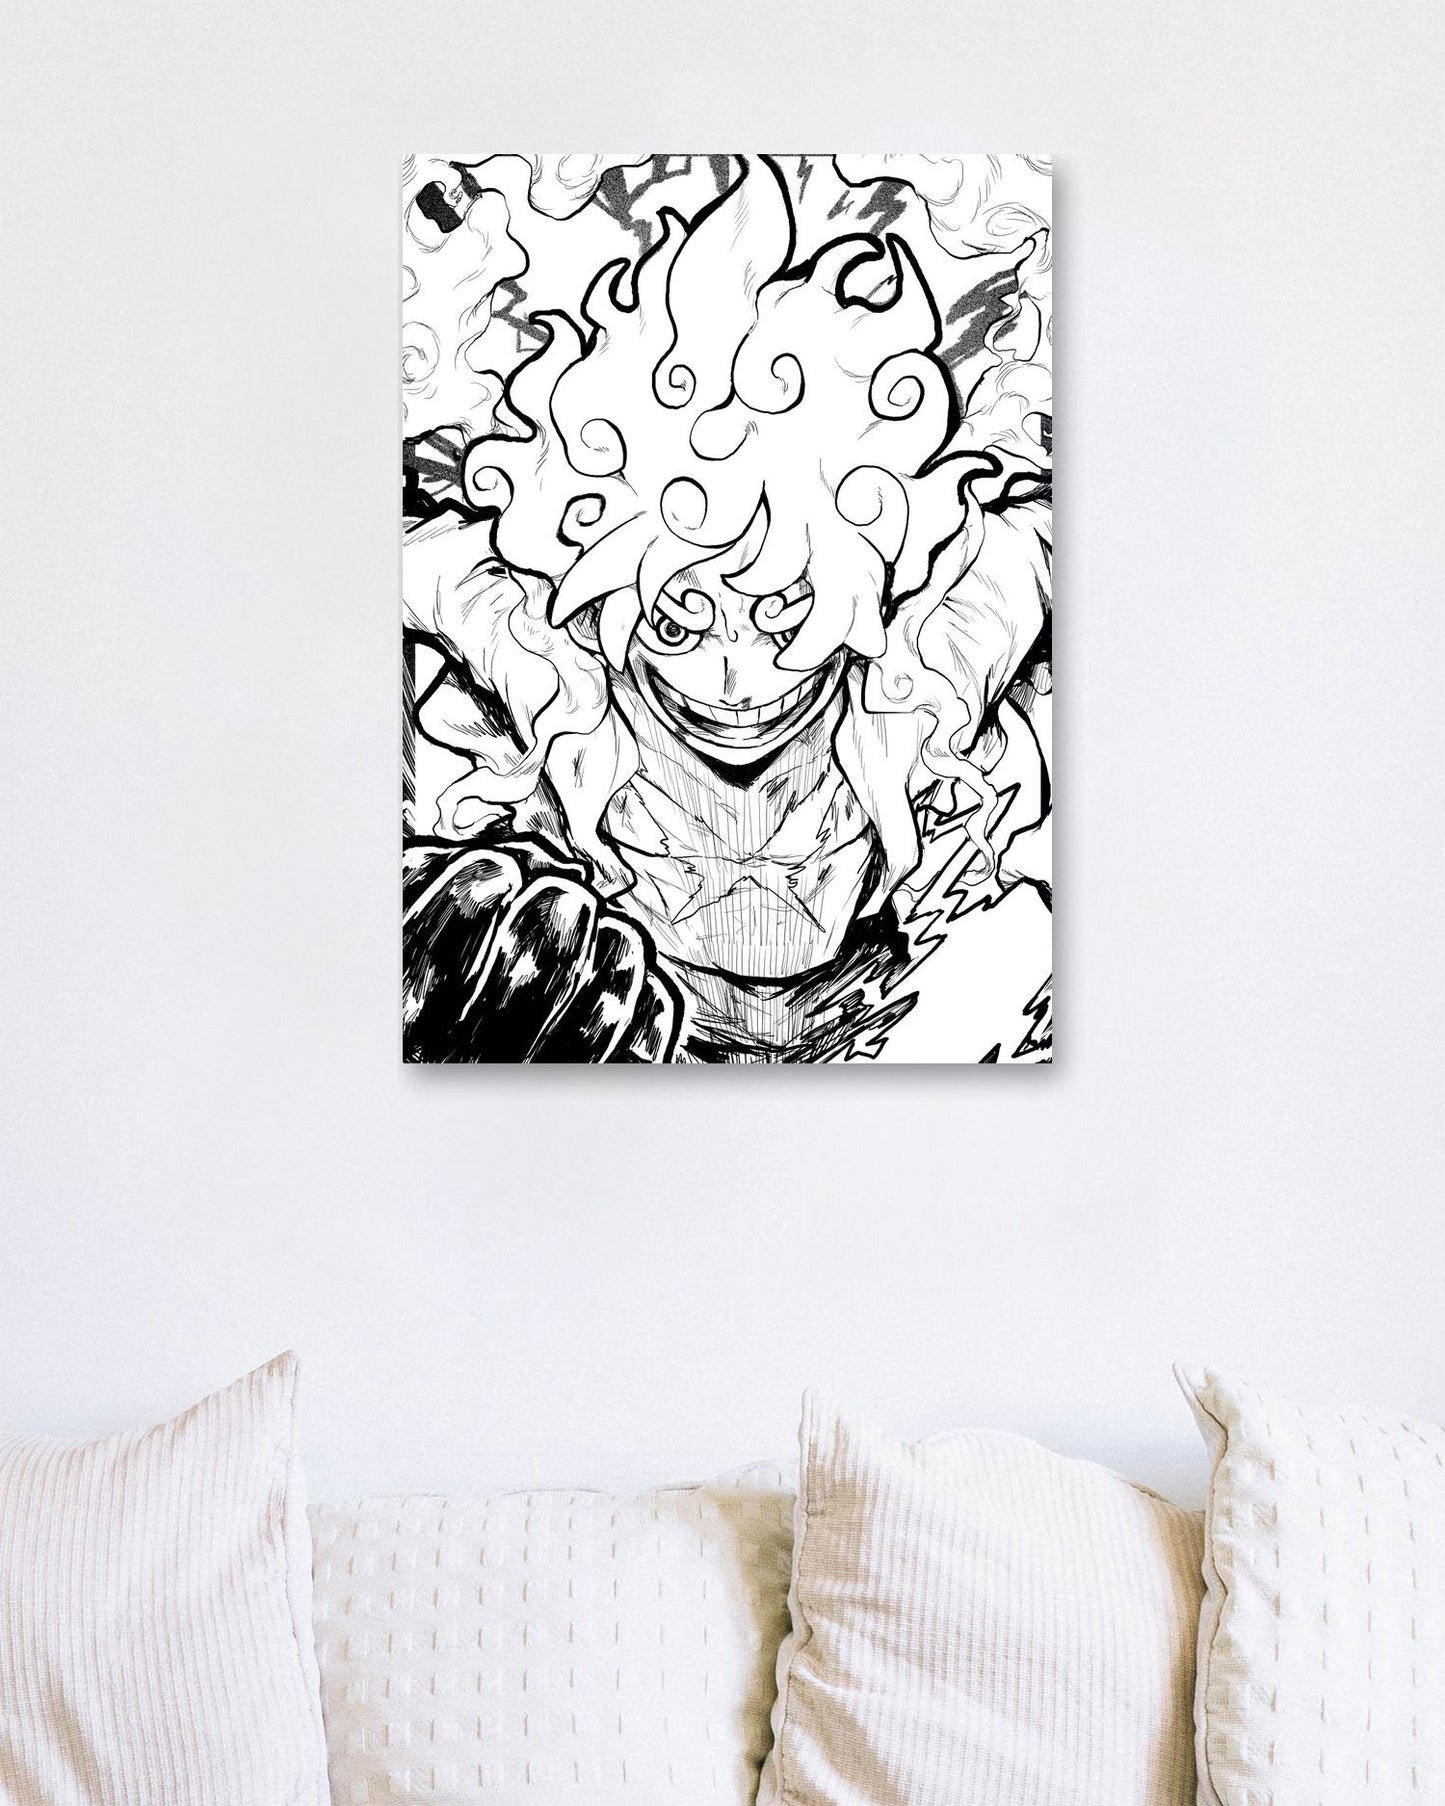 Luffy 18 - @UPGallery